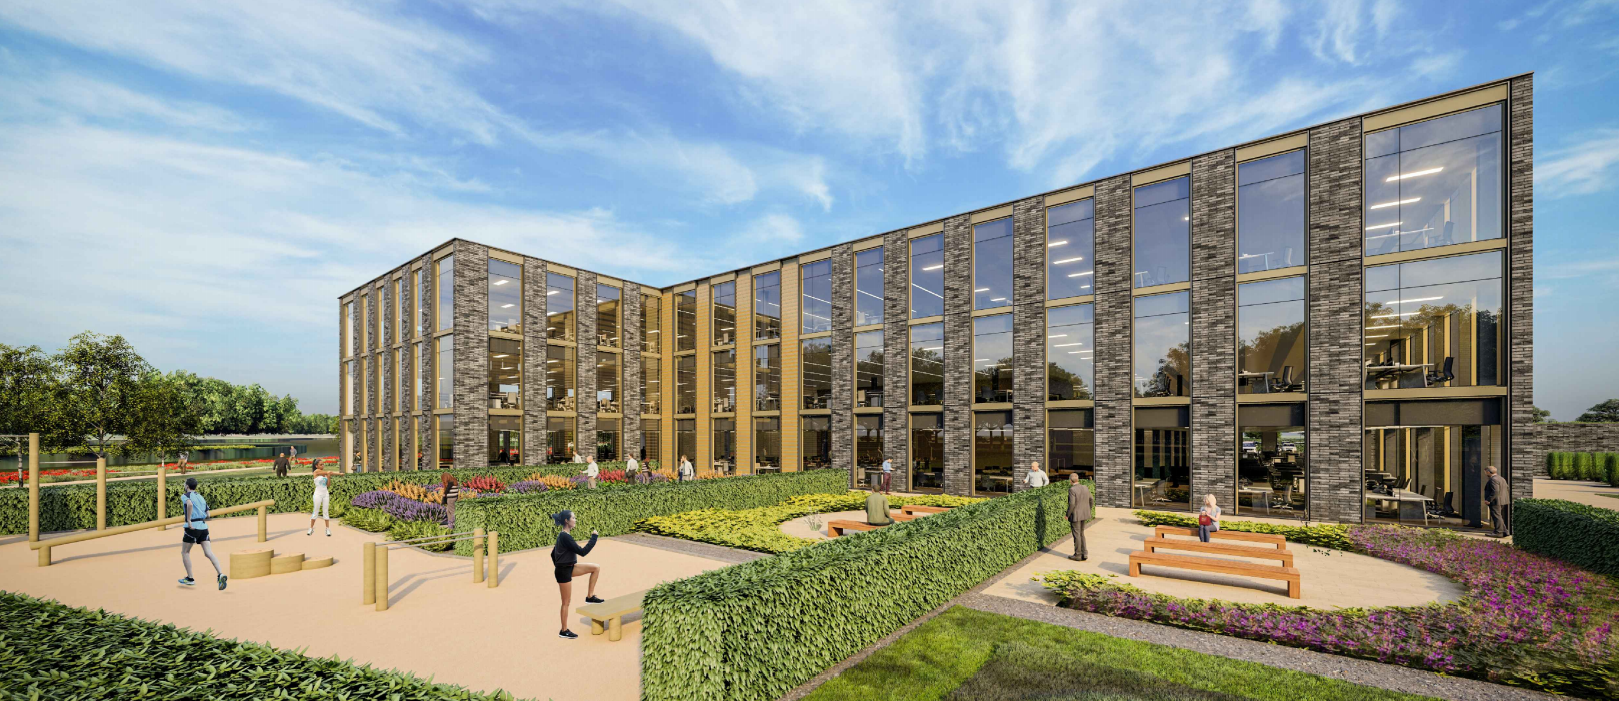 £25m office block planned for outskirts of Raploch